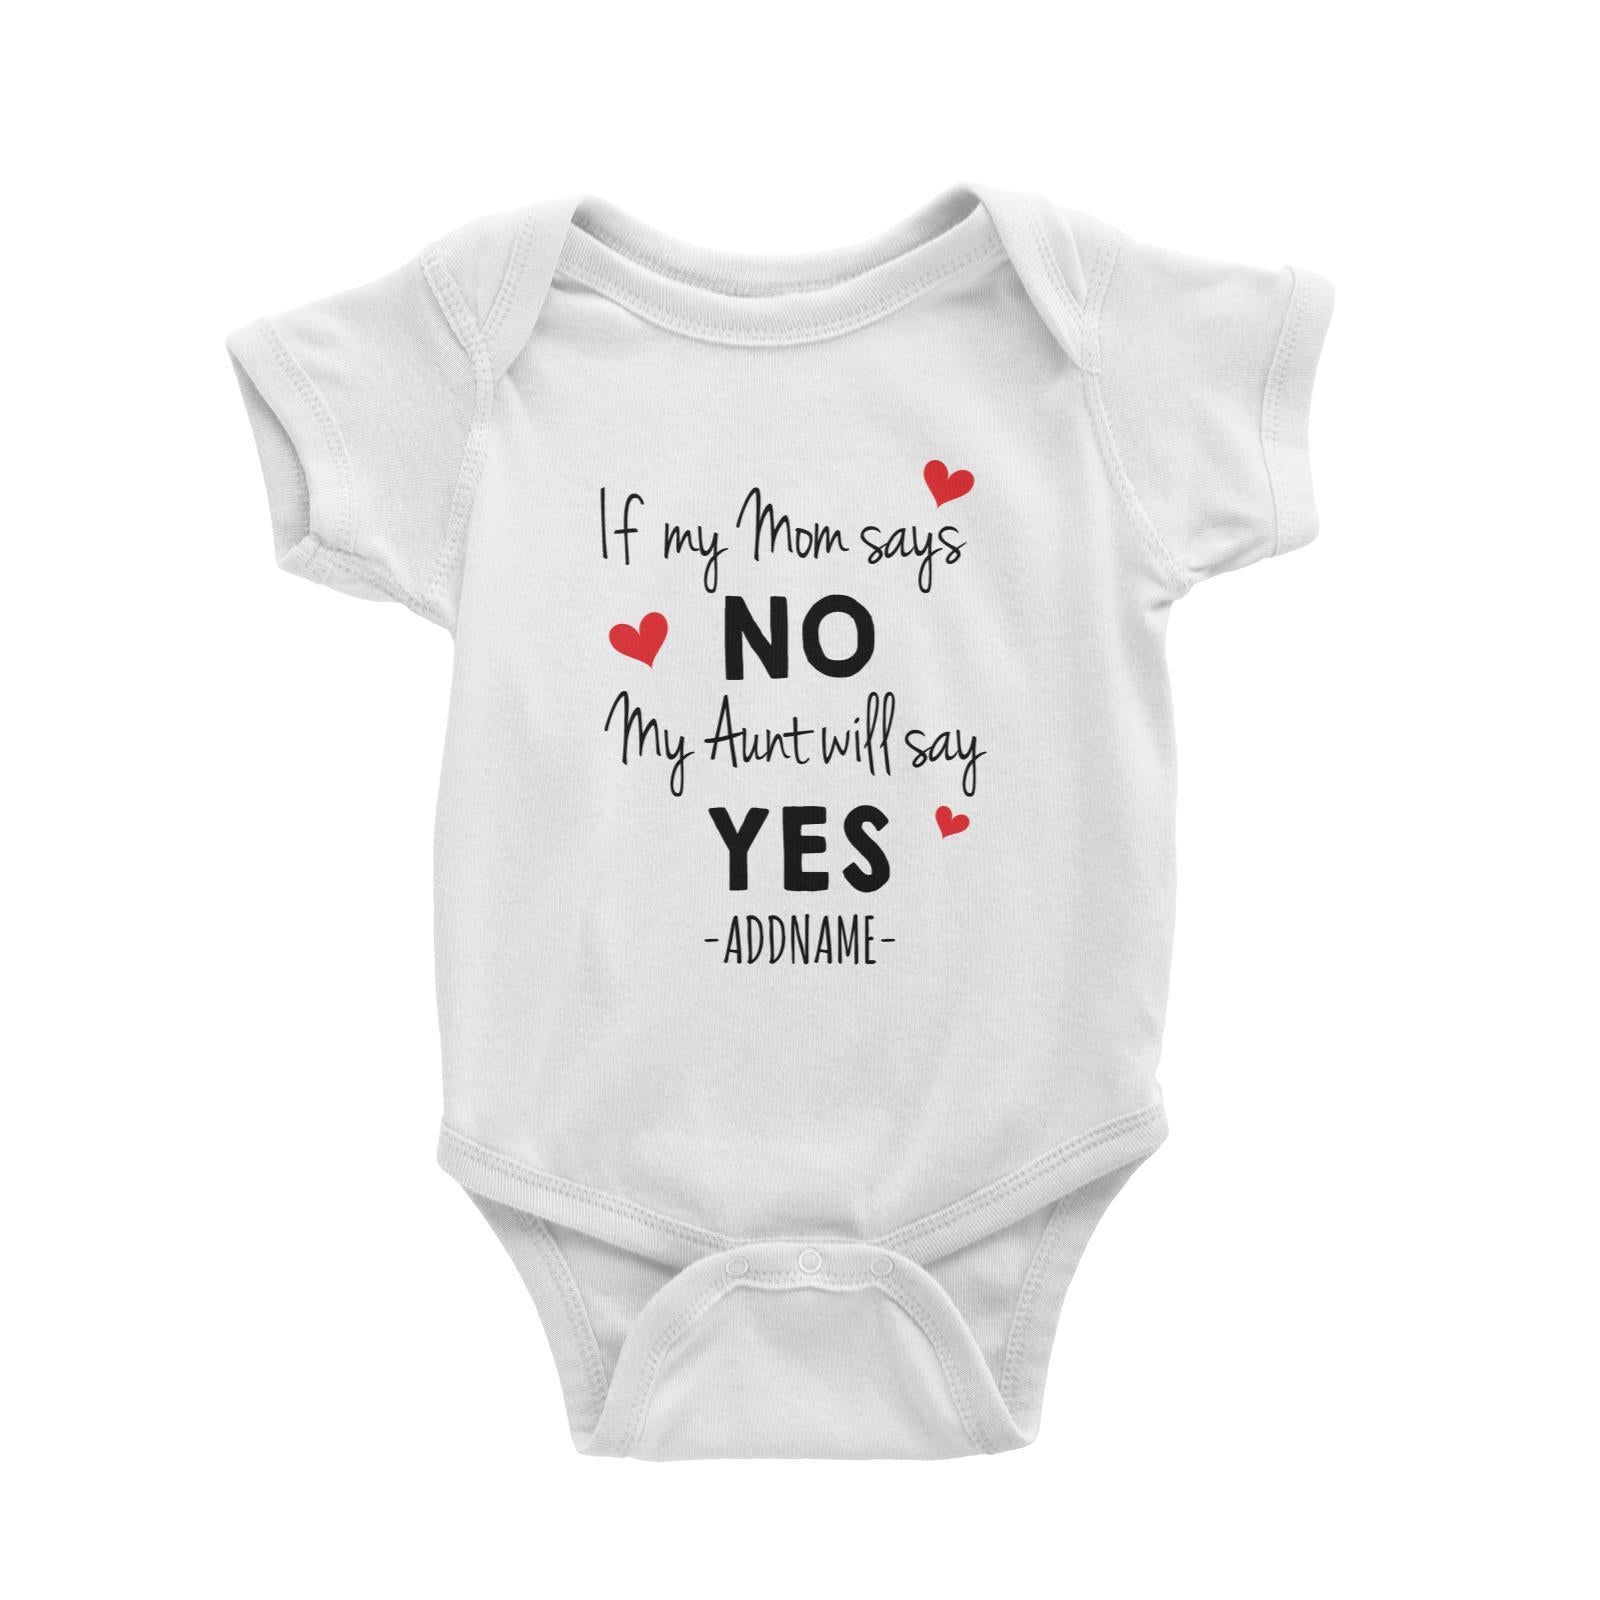 If My Mom Says No, My Aunt Will Say Yes Addname Baby Romper Personalizable Designs Basic Newborn